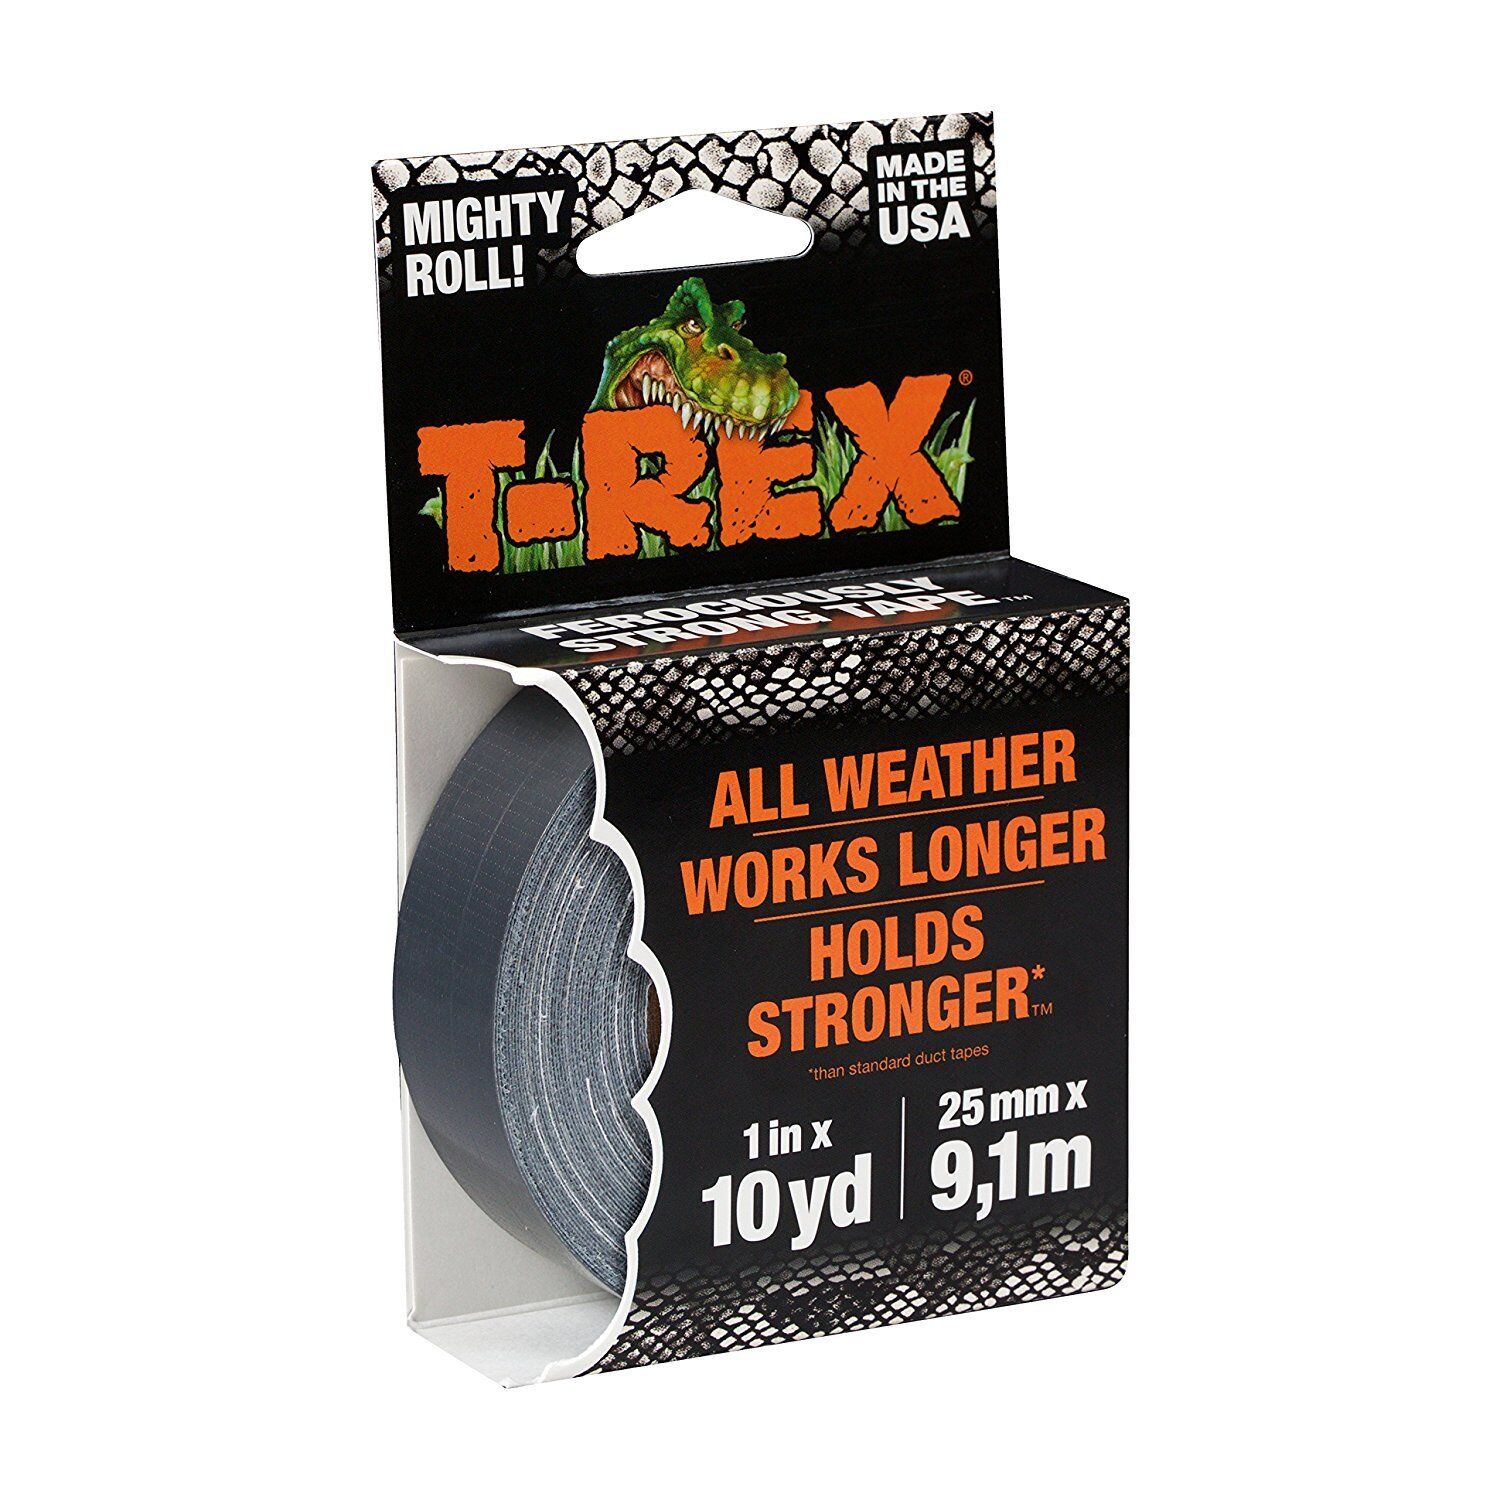 T-Rex Ferociously Strong Duct Tapes - 1